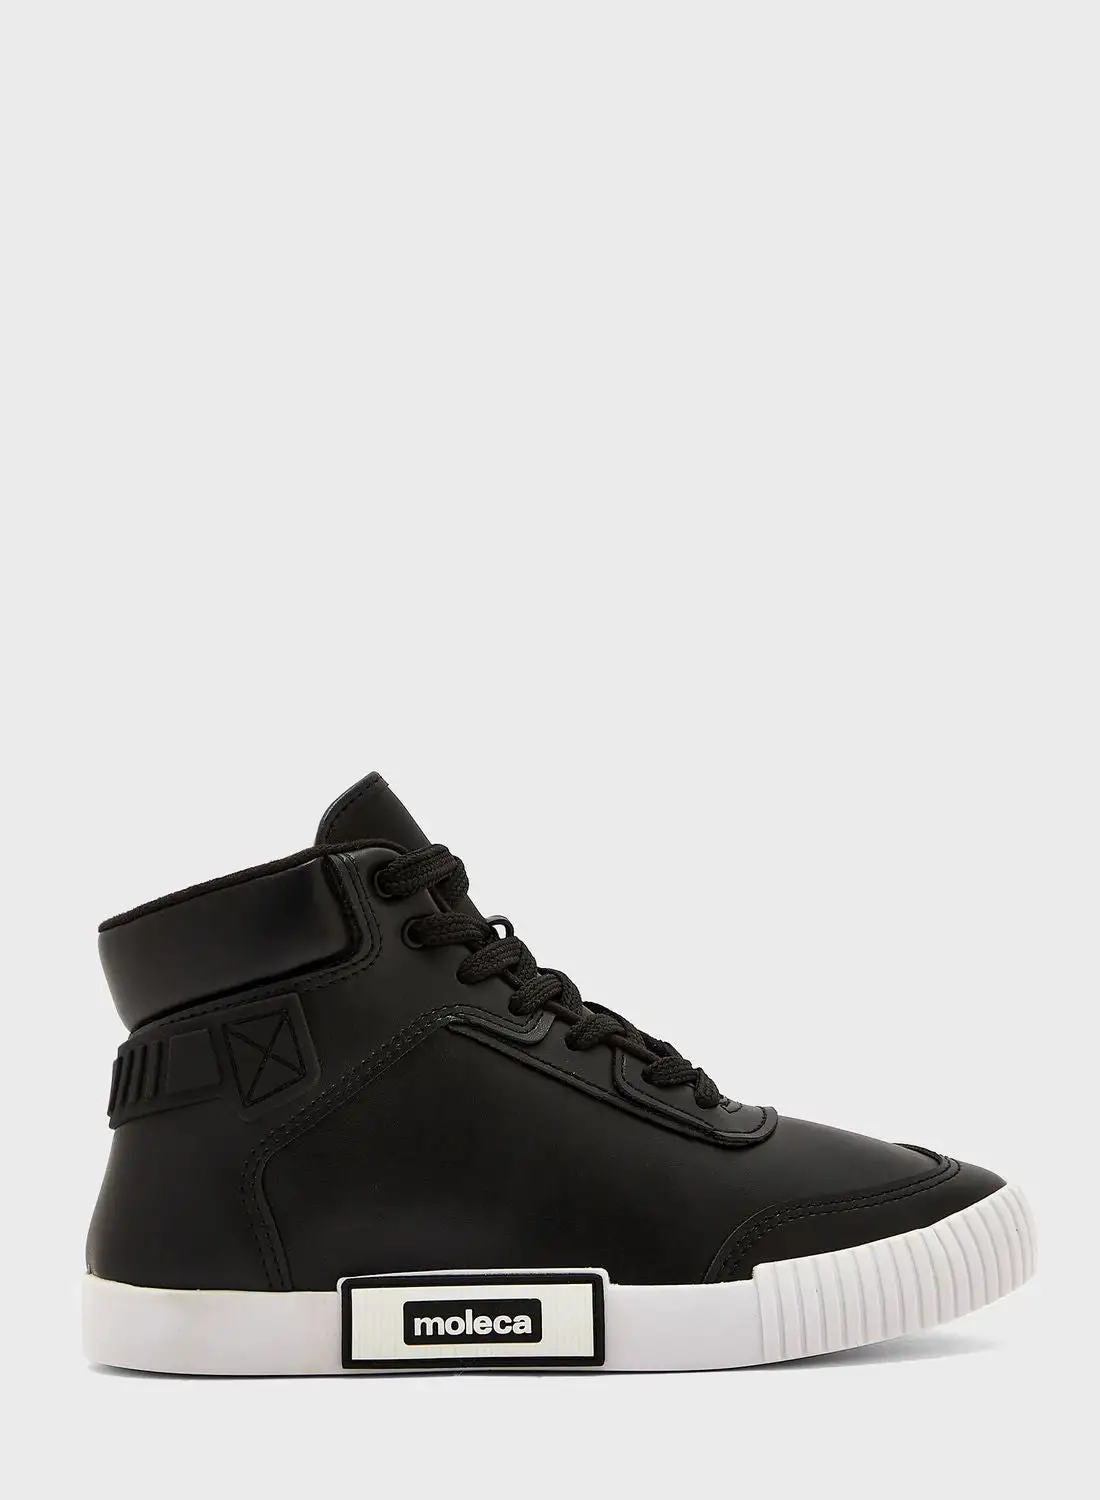 MOLECA Lace Up High Top Sneakers